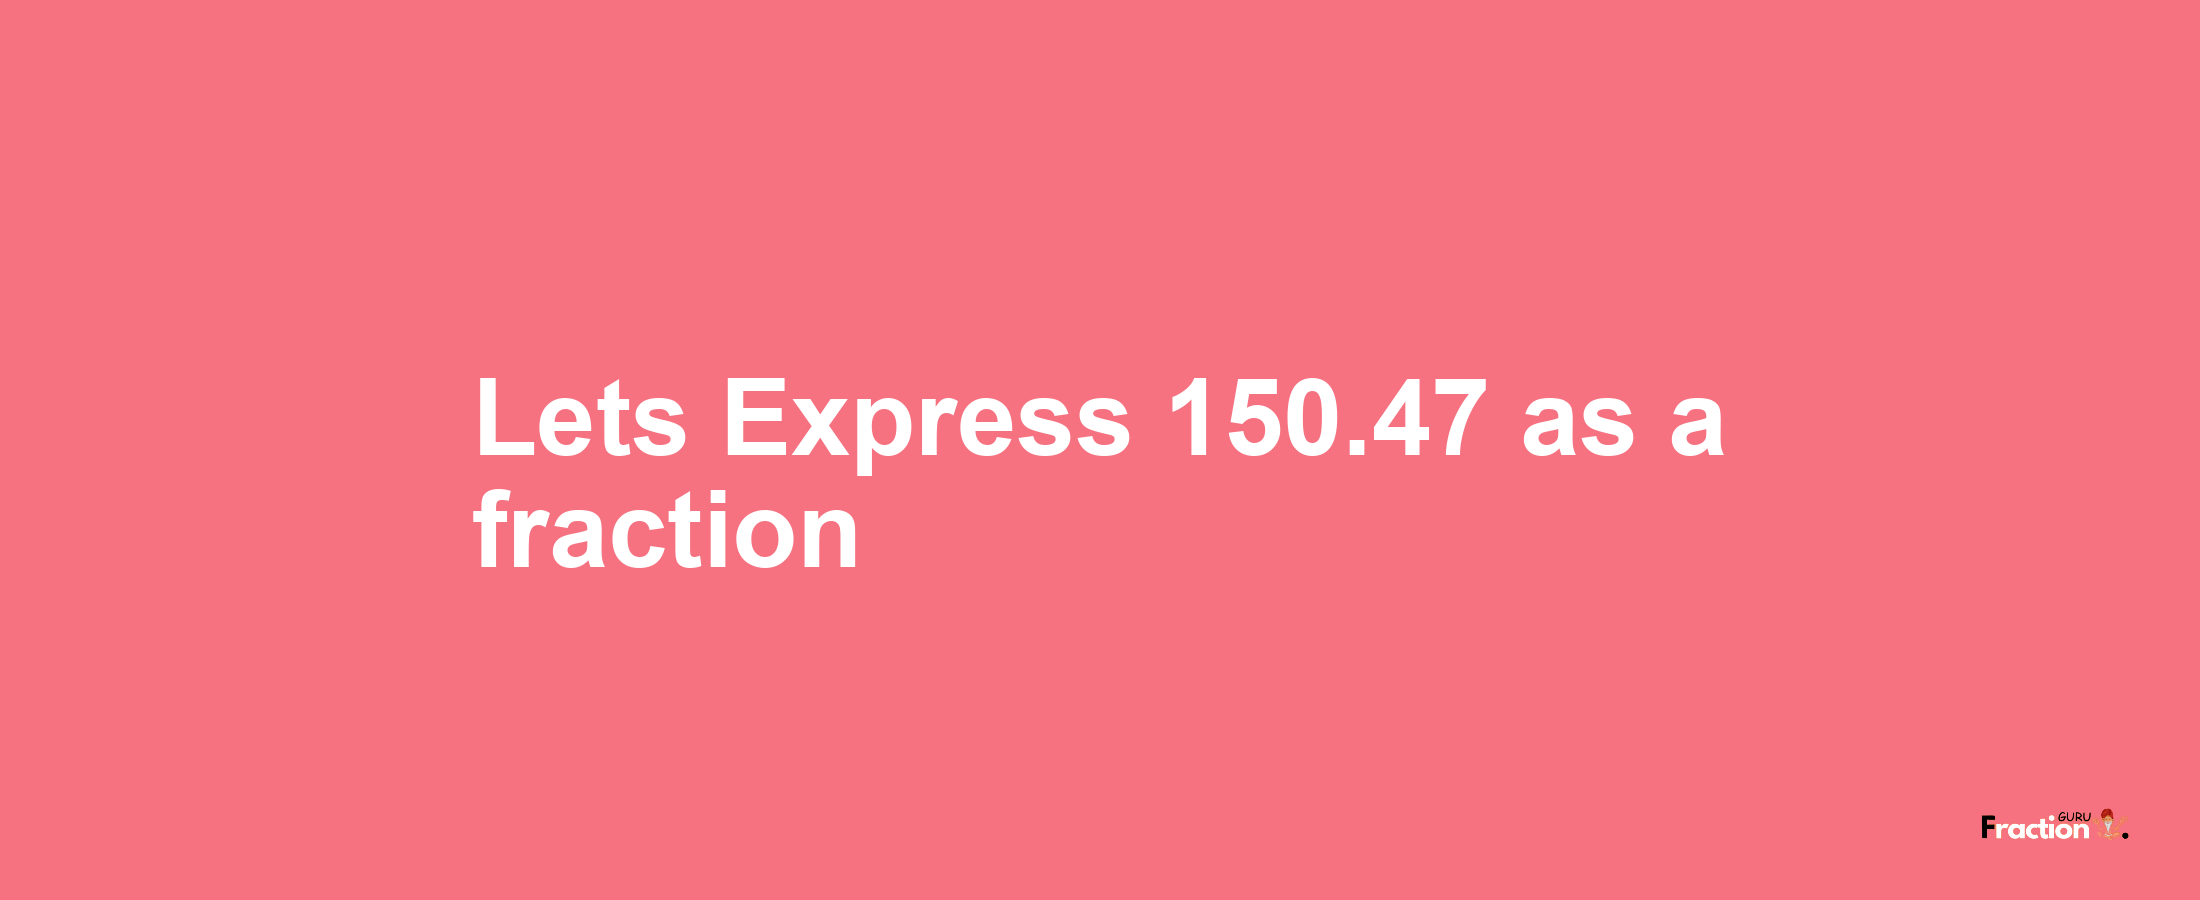 Lets Express 150.47 as afraction